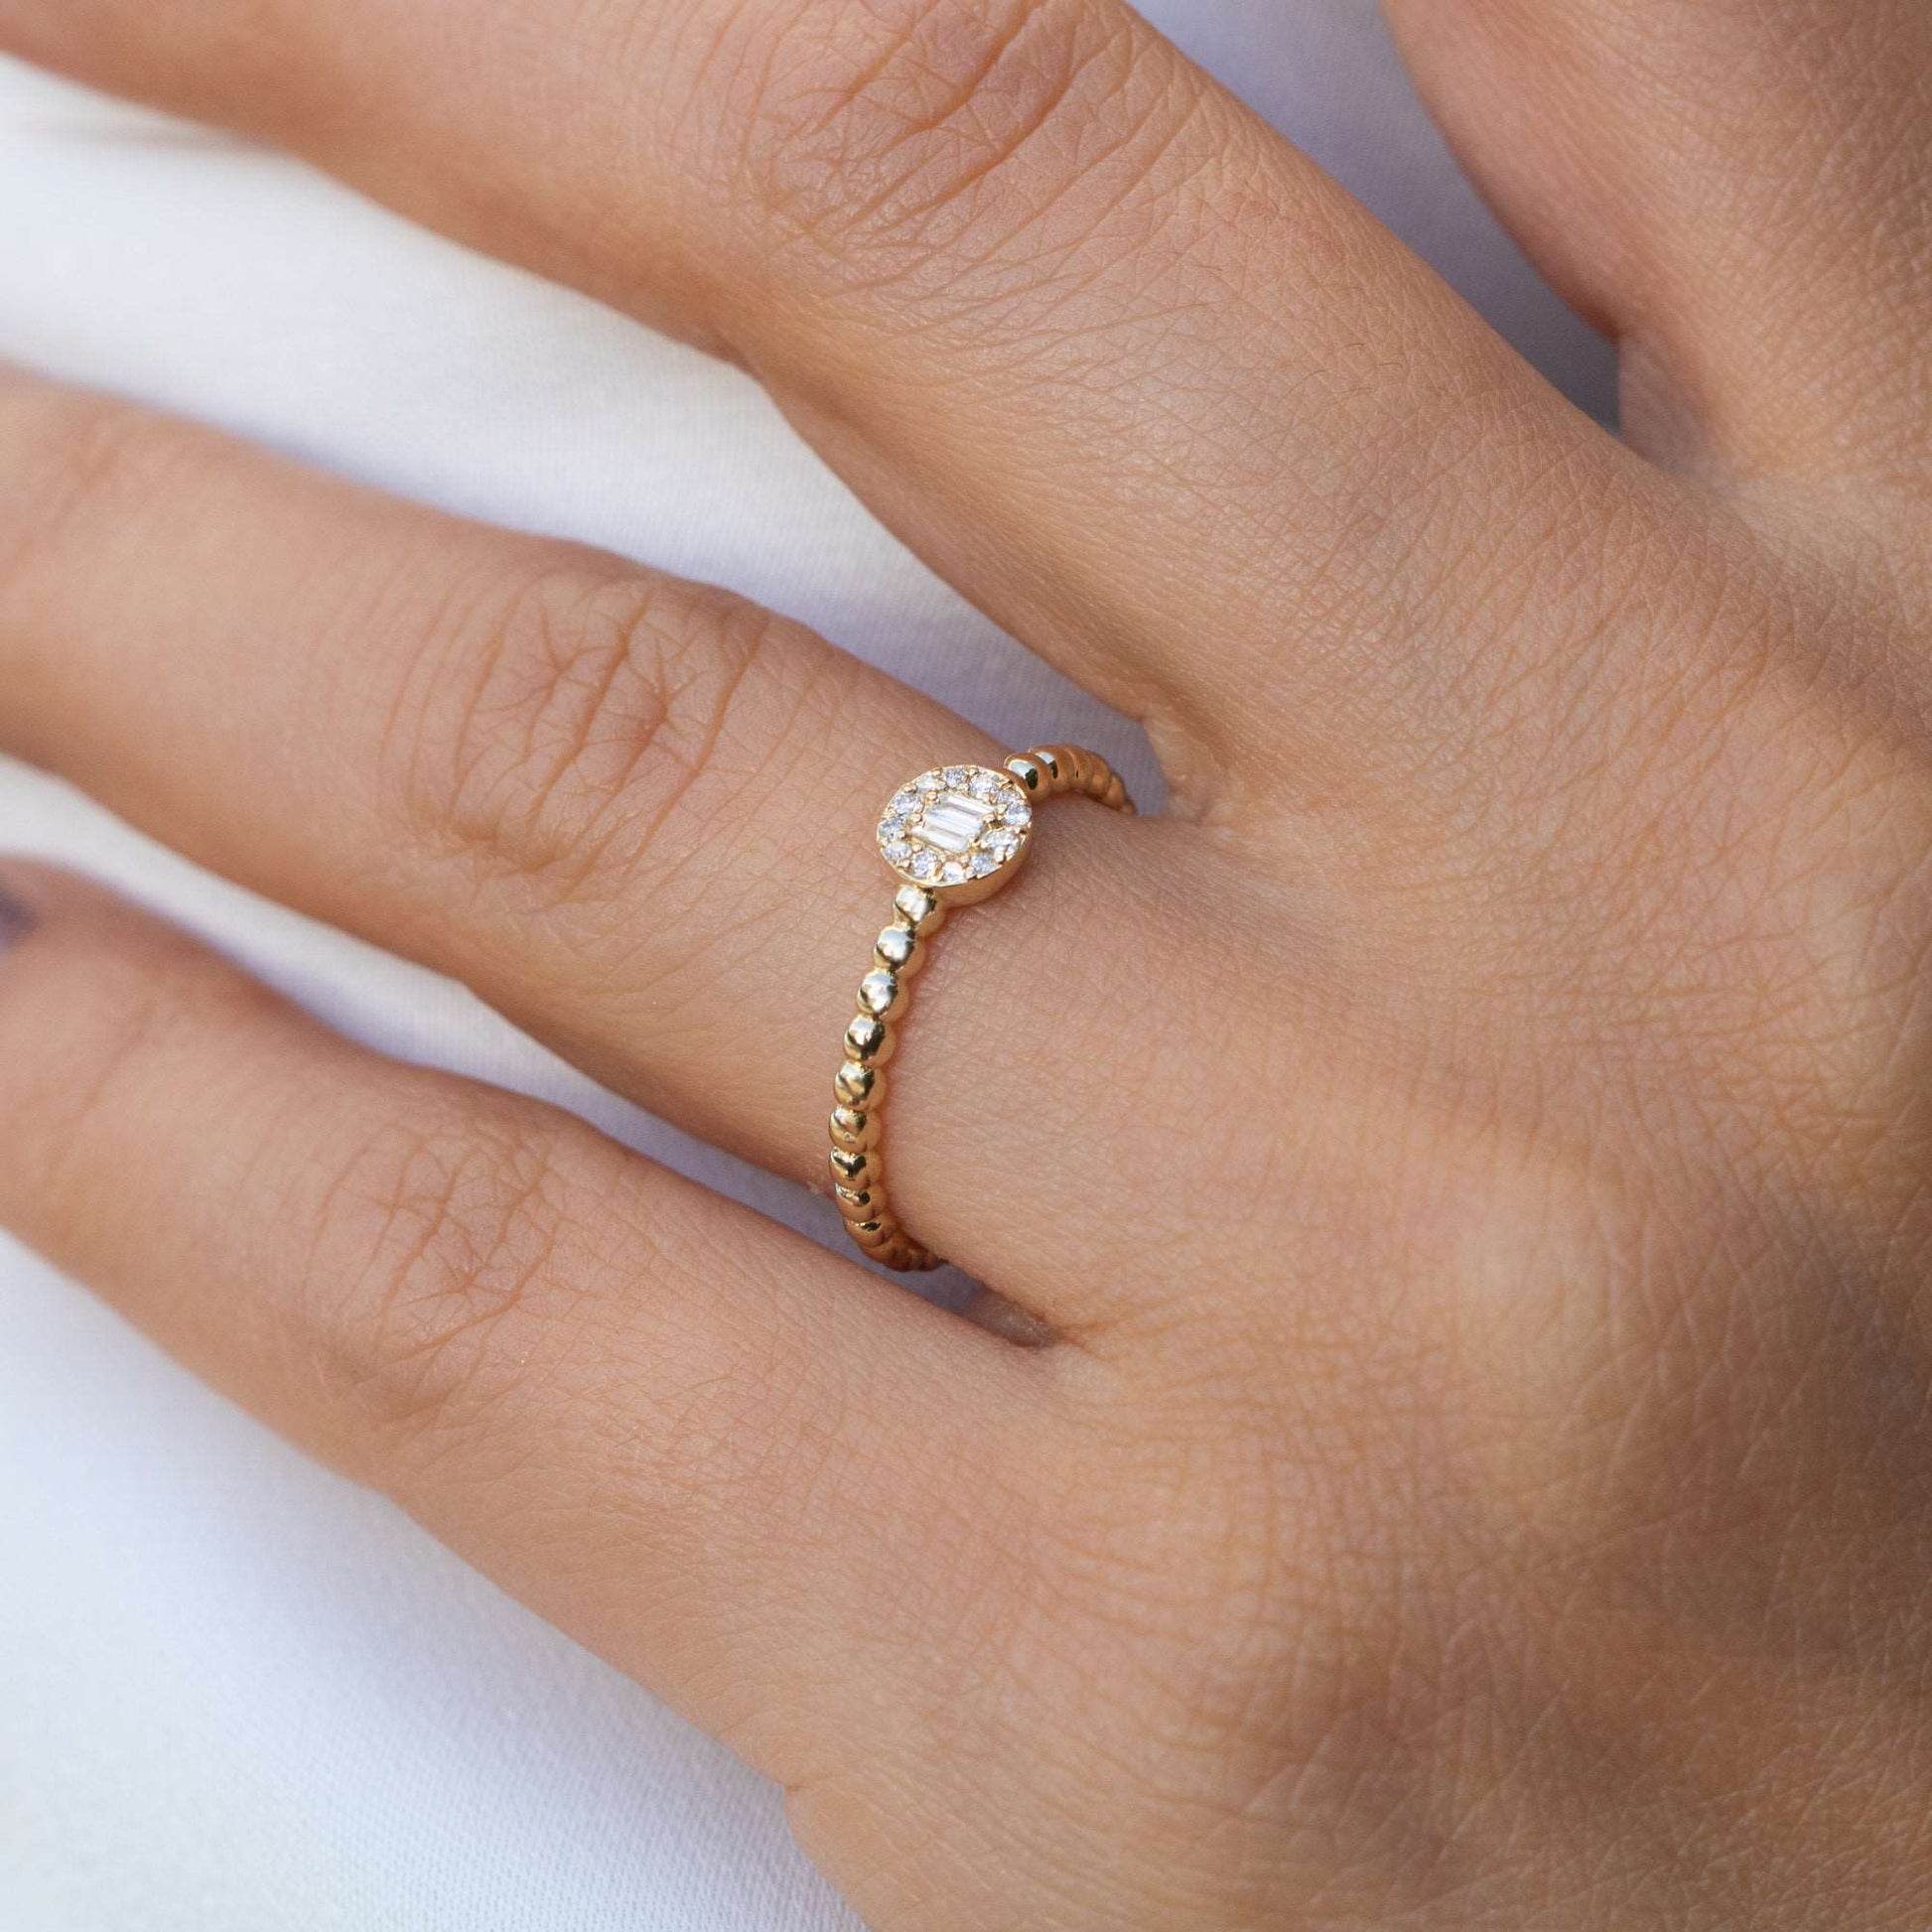 14 Stone 14K Yellow Gold Baguette and Round Diamond Ring Shop online from Artisan Brands